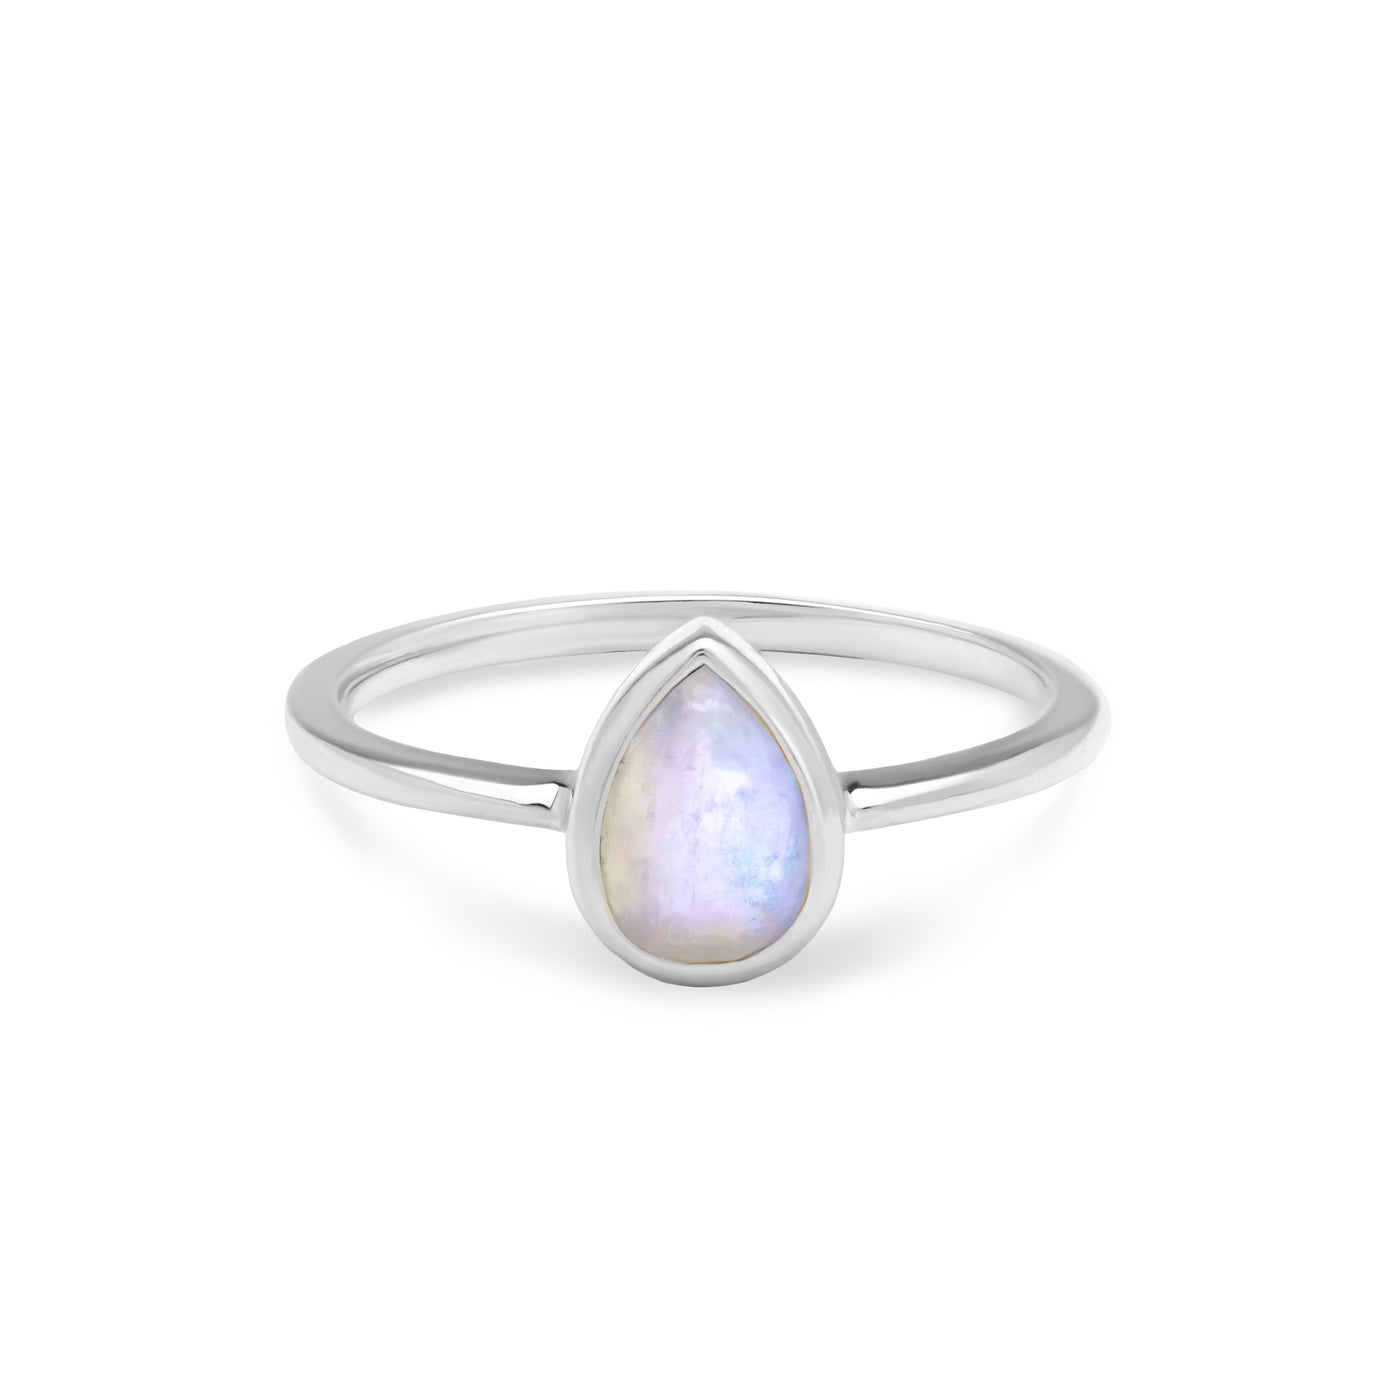 14 Karat White Gold Ring with Pear Shaped Moonstone Against White Background